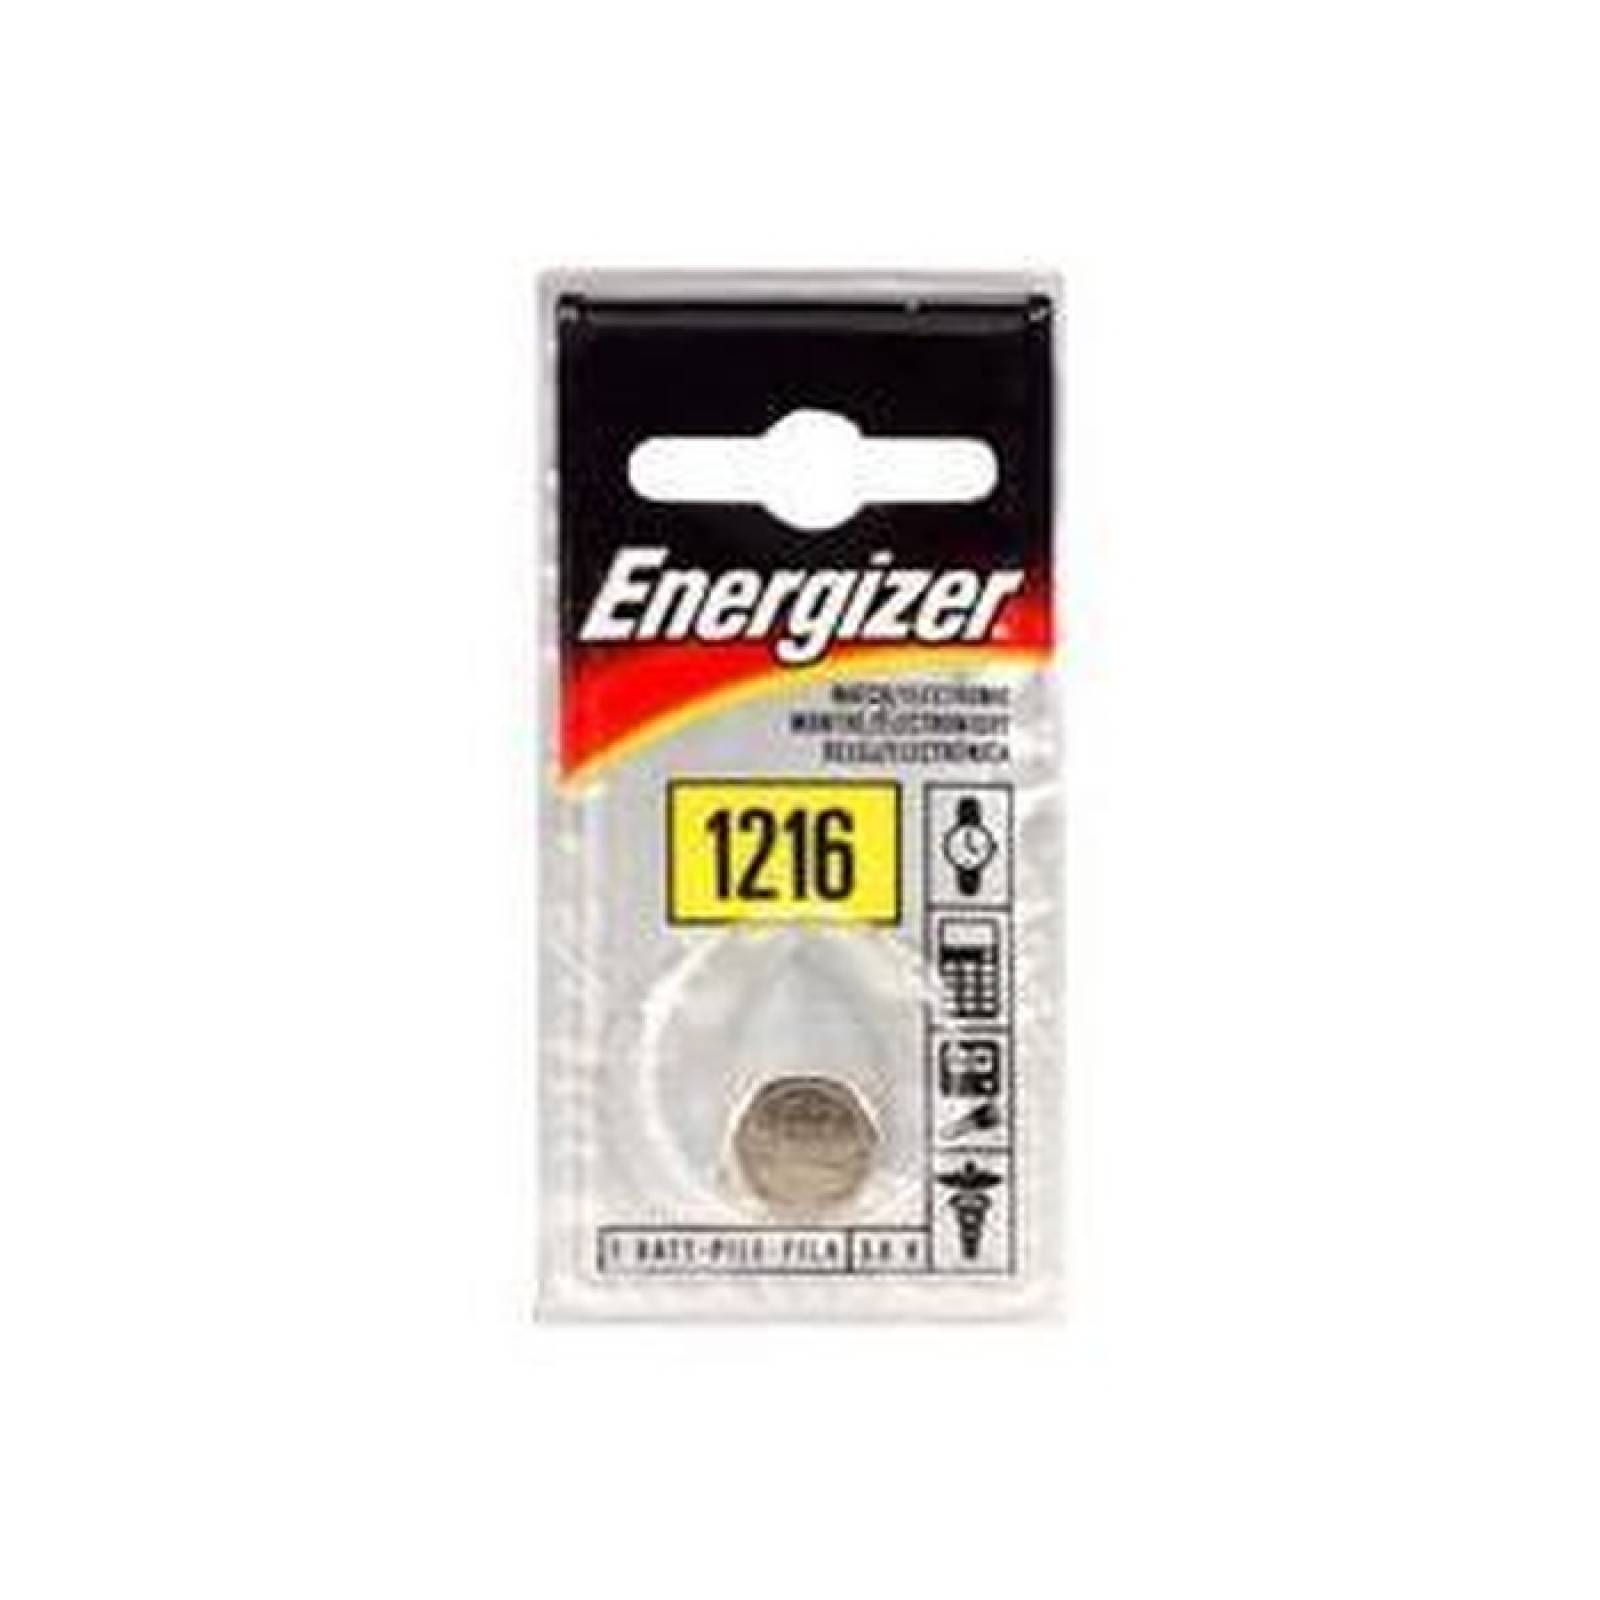 Energizer 25 mAh Coin Cell Battery